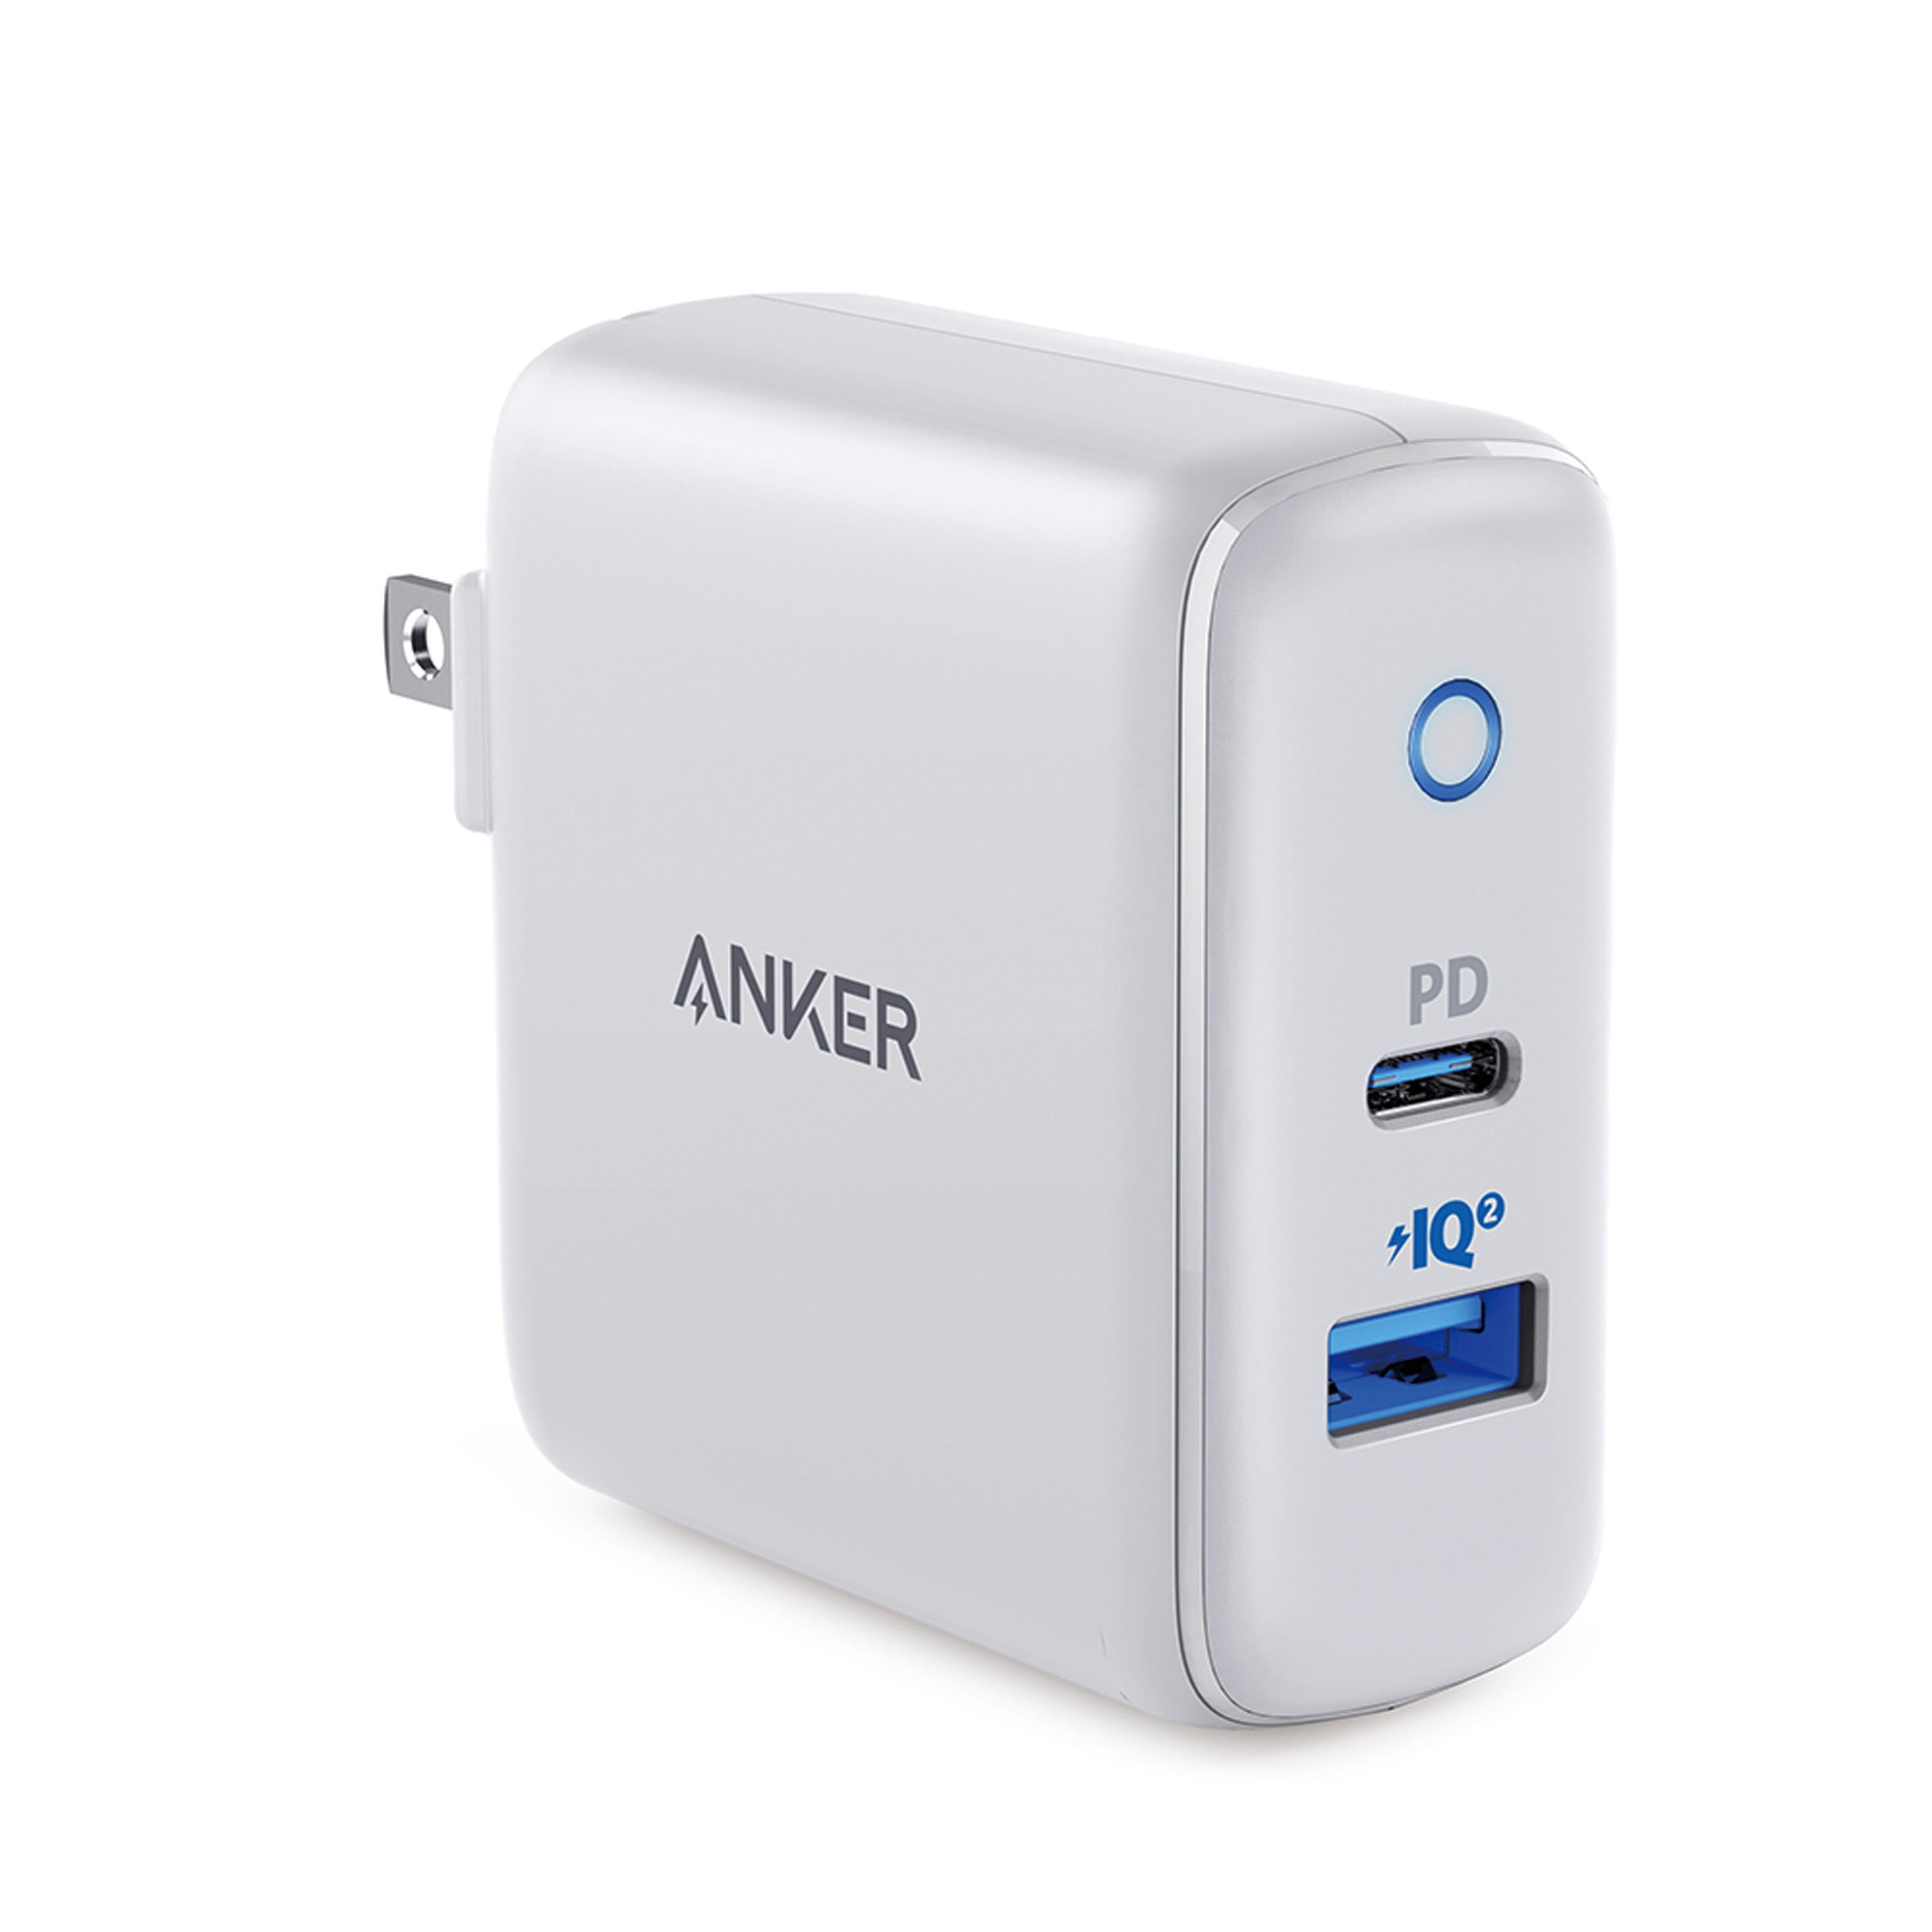 Anker PowerPort PD II with Upgraded 20W USB-C Power Delivery and USB-A Power IQ 2.0